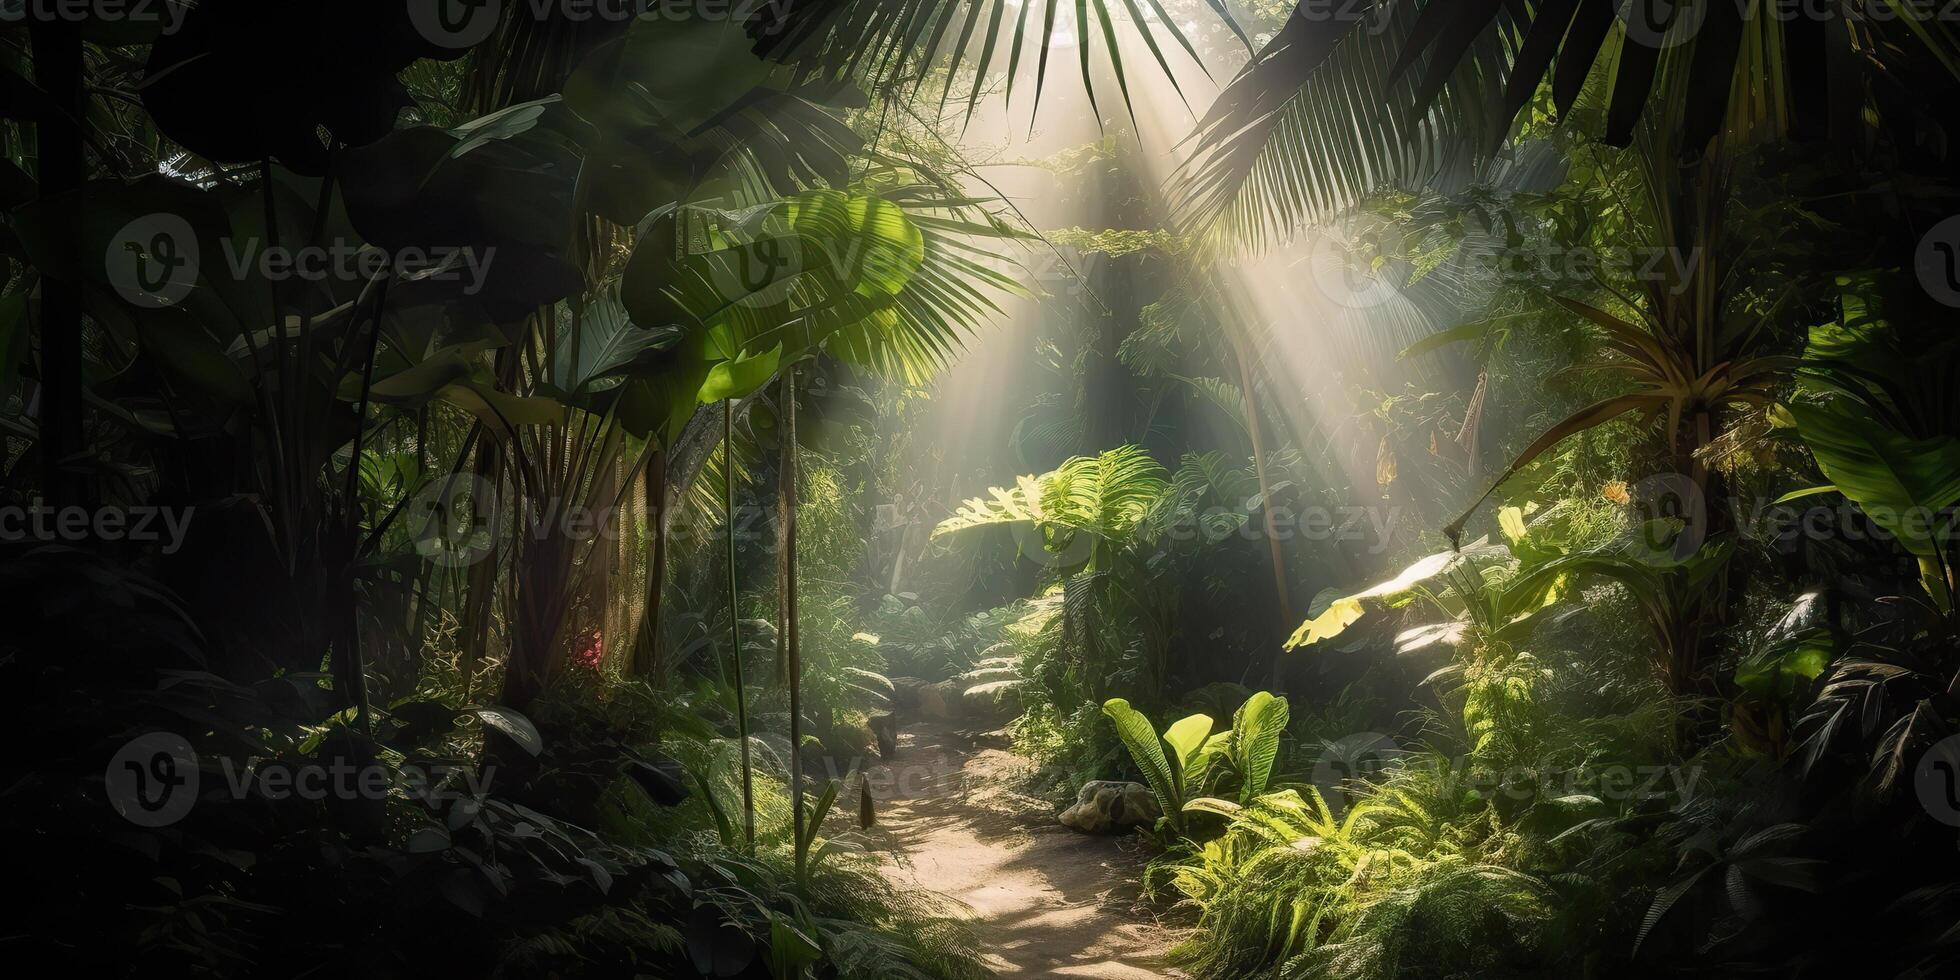 Tropical rain jungle deep forest with beab ray light shining. Nature outdoor adventure vibe scene background view photo